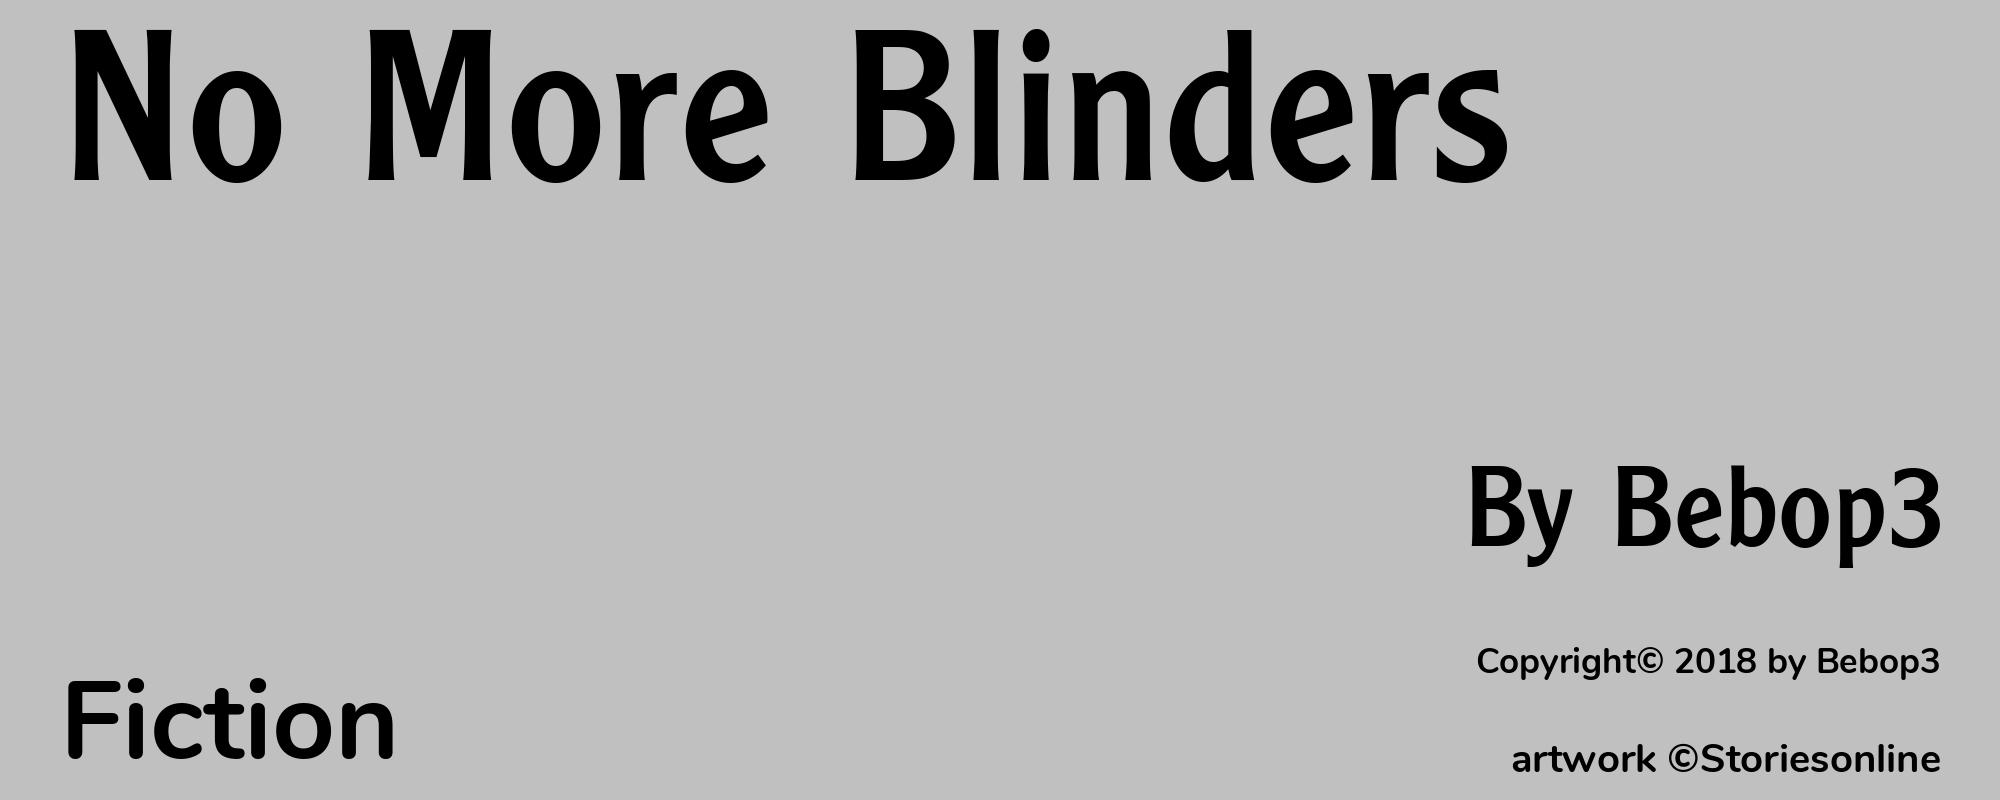 No More Blinders - Cover